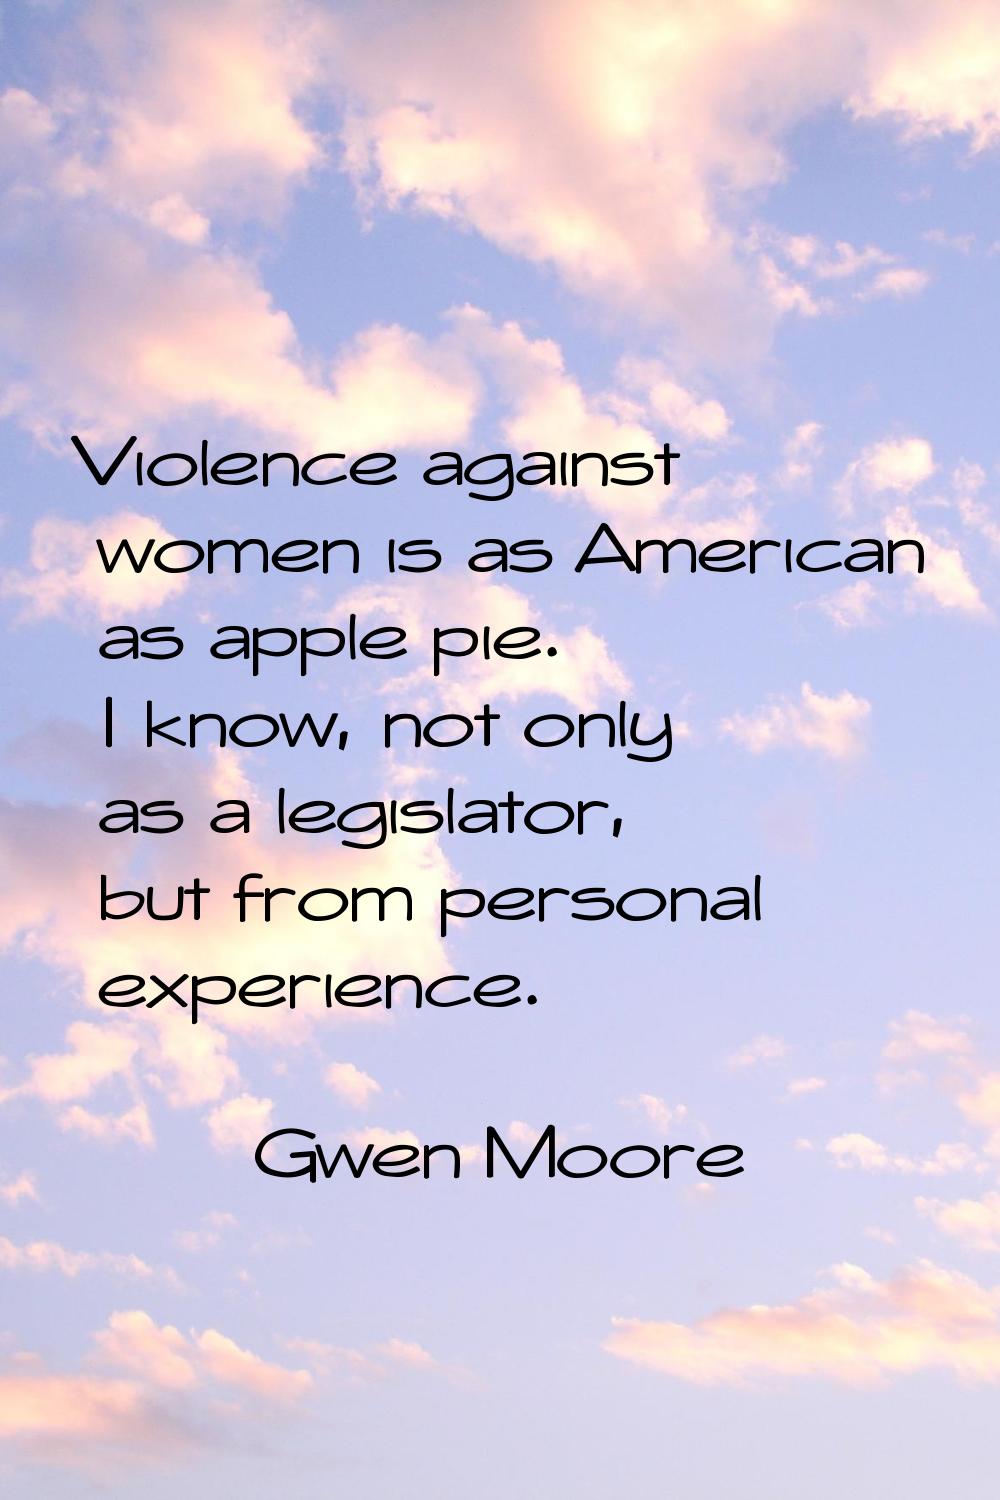 Violence against women is as American as apple pie. I know, not only as a legislator, but from pers